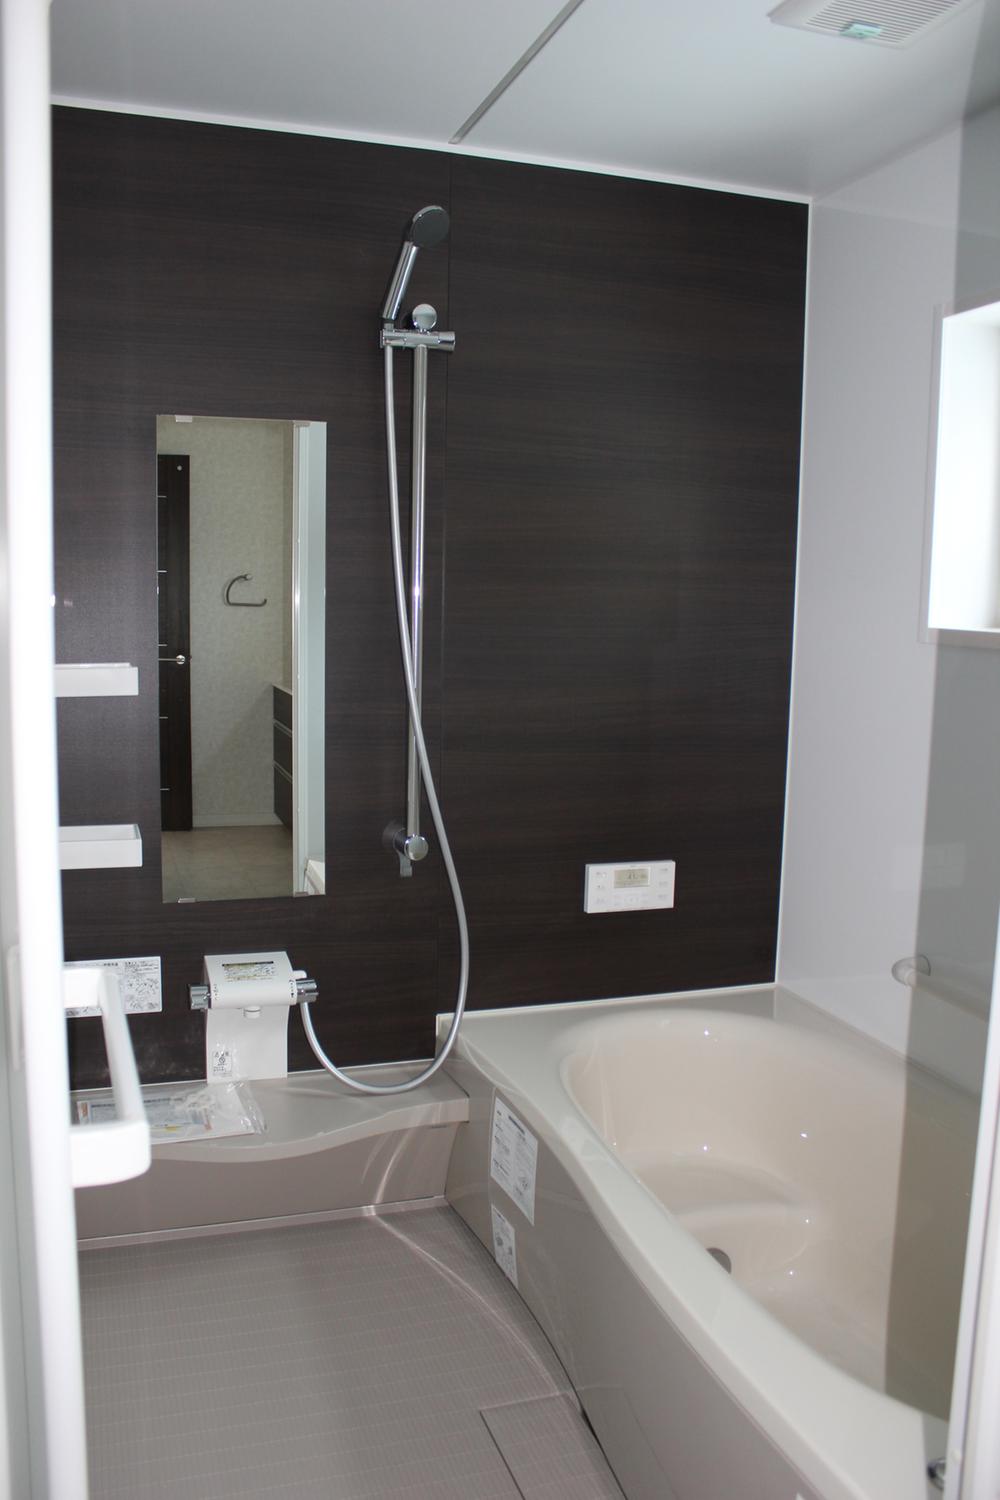 Bathroom. 1 square meters with LED lighting of the futuristic design